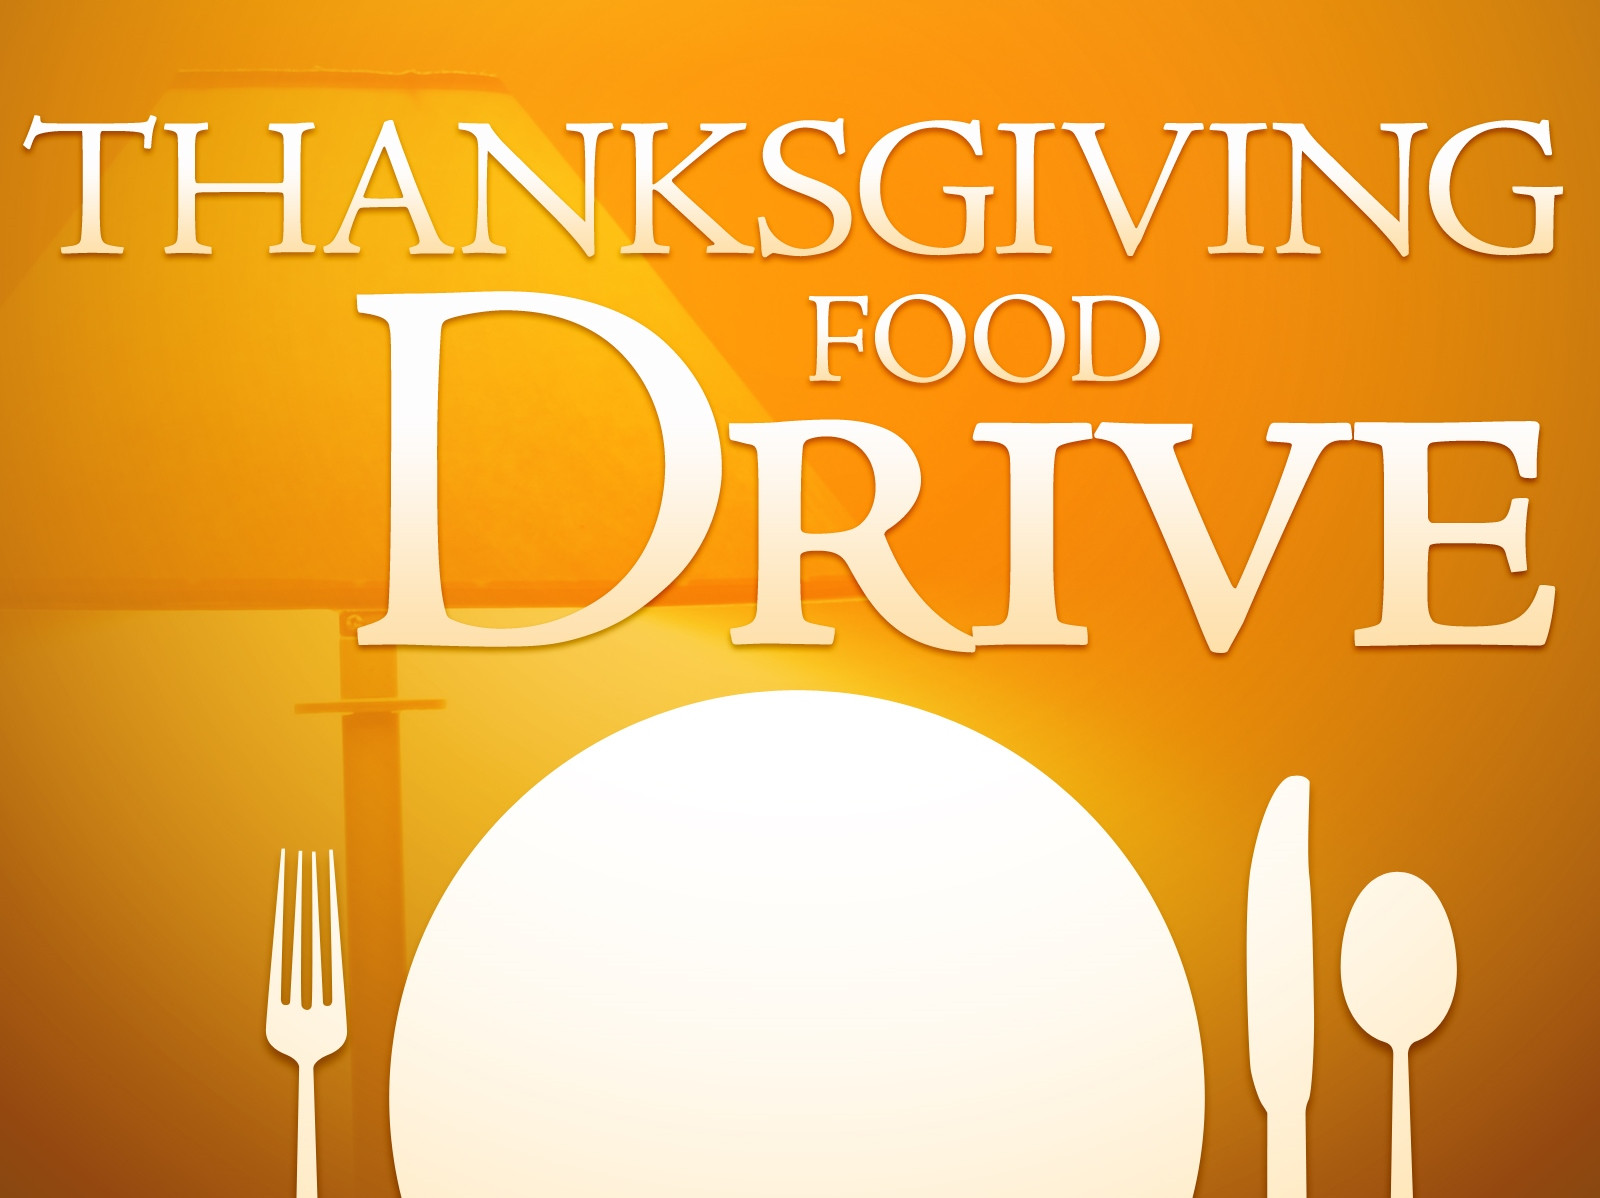 Thanksgiving Food Pantry
 "Turkey Bowl" To Help Needy For Thanksgiving